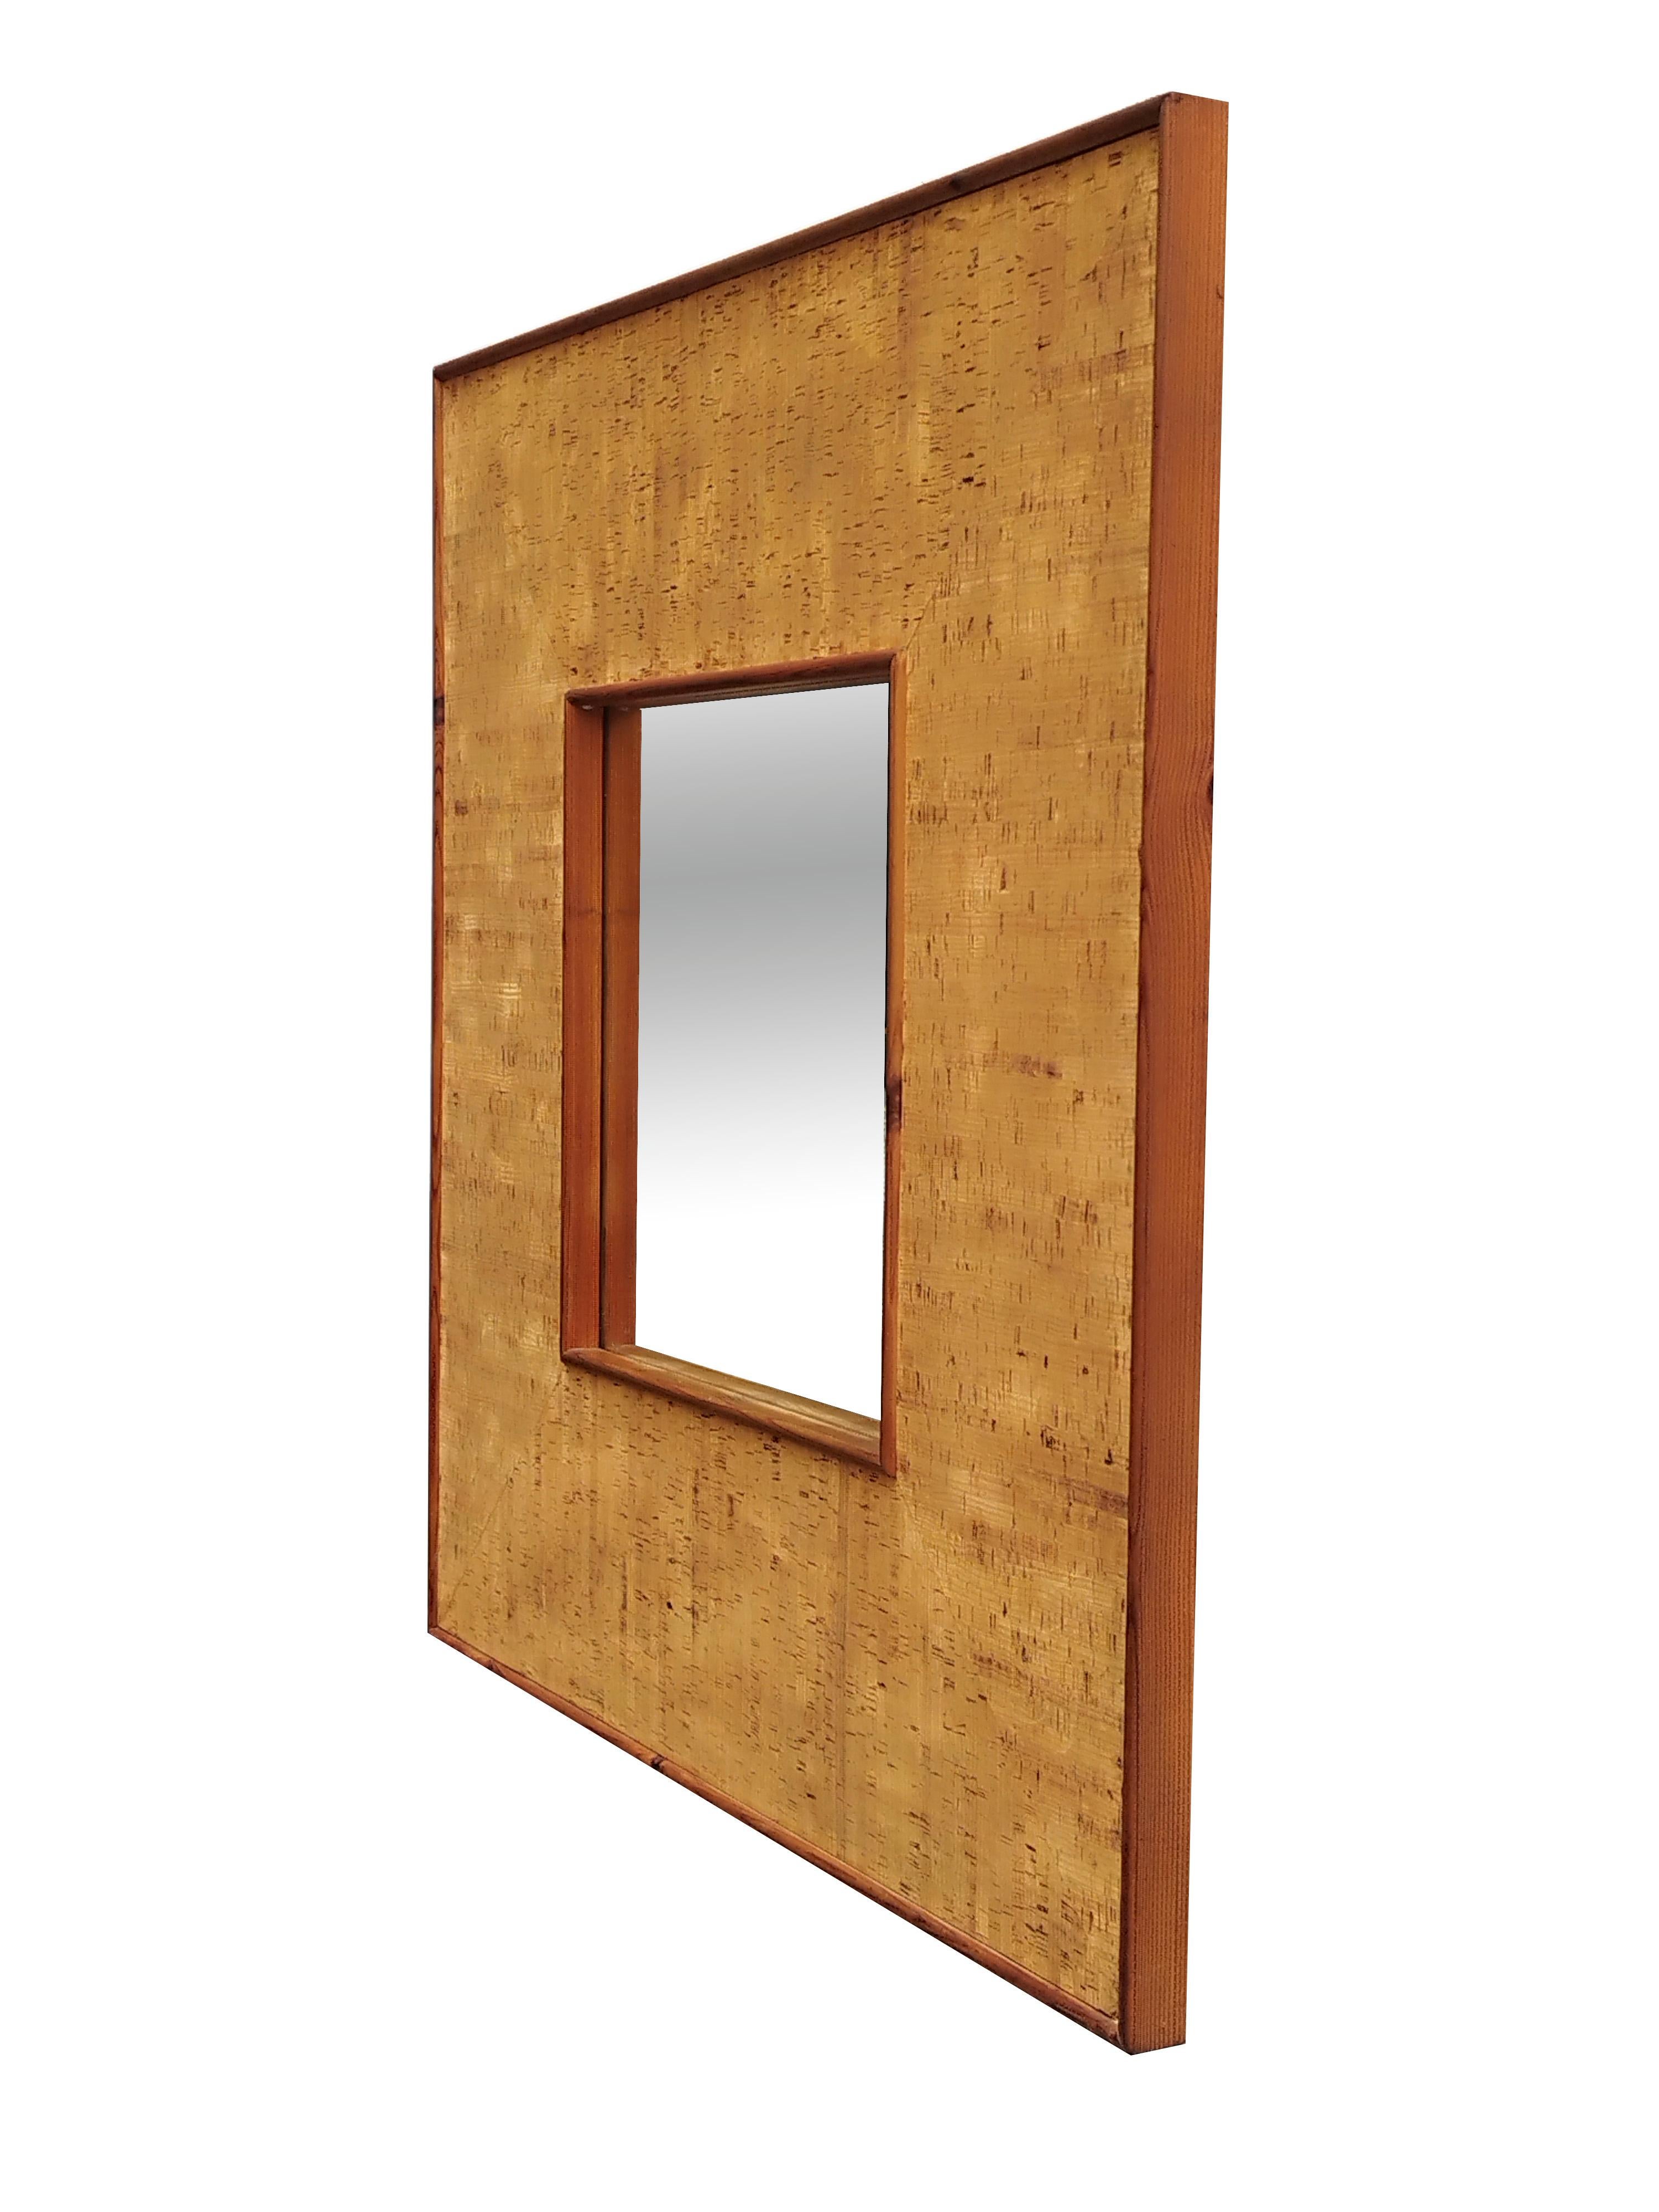 Italian modern square cork mirror.
This beautiful mid-century Italian square cork mirror was made from a very unusual type of cork and is versatile enough to be used in a variety of interior or design themes.
